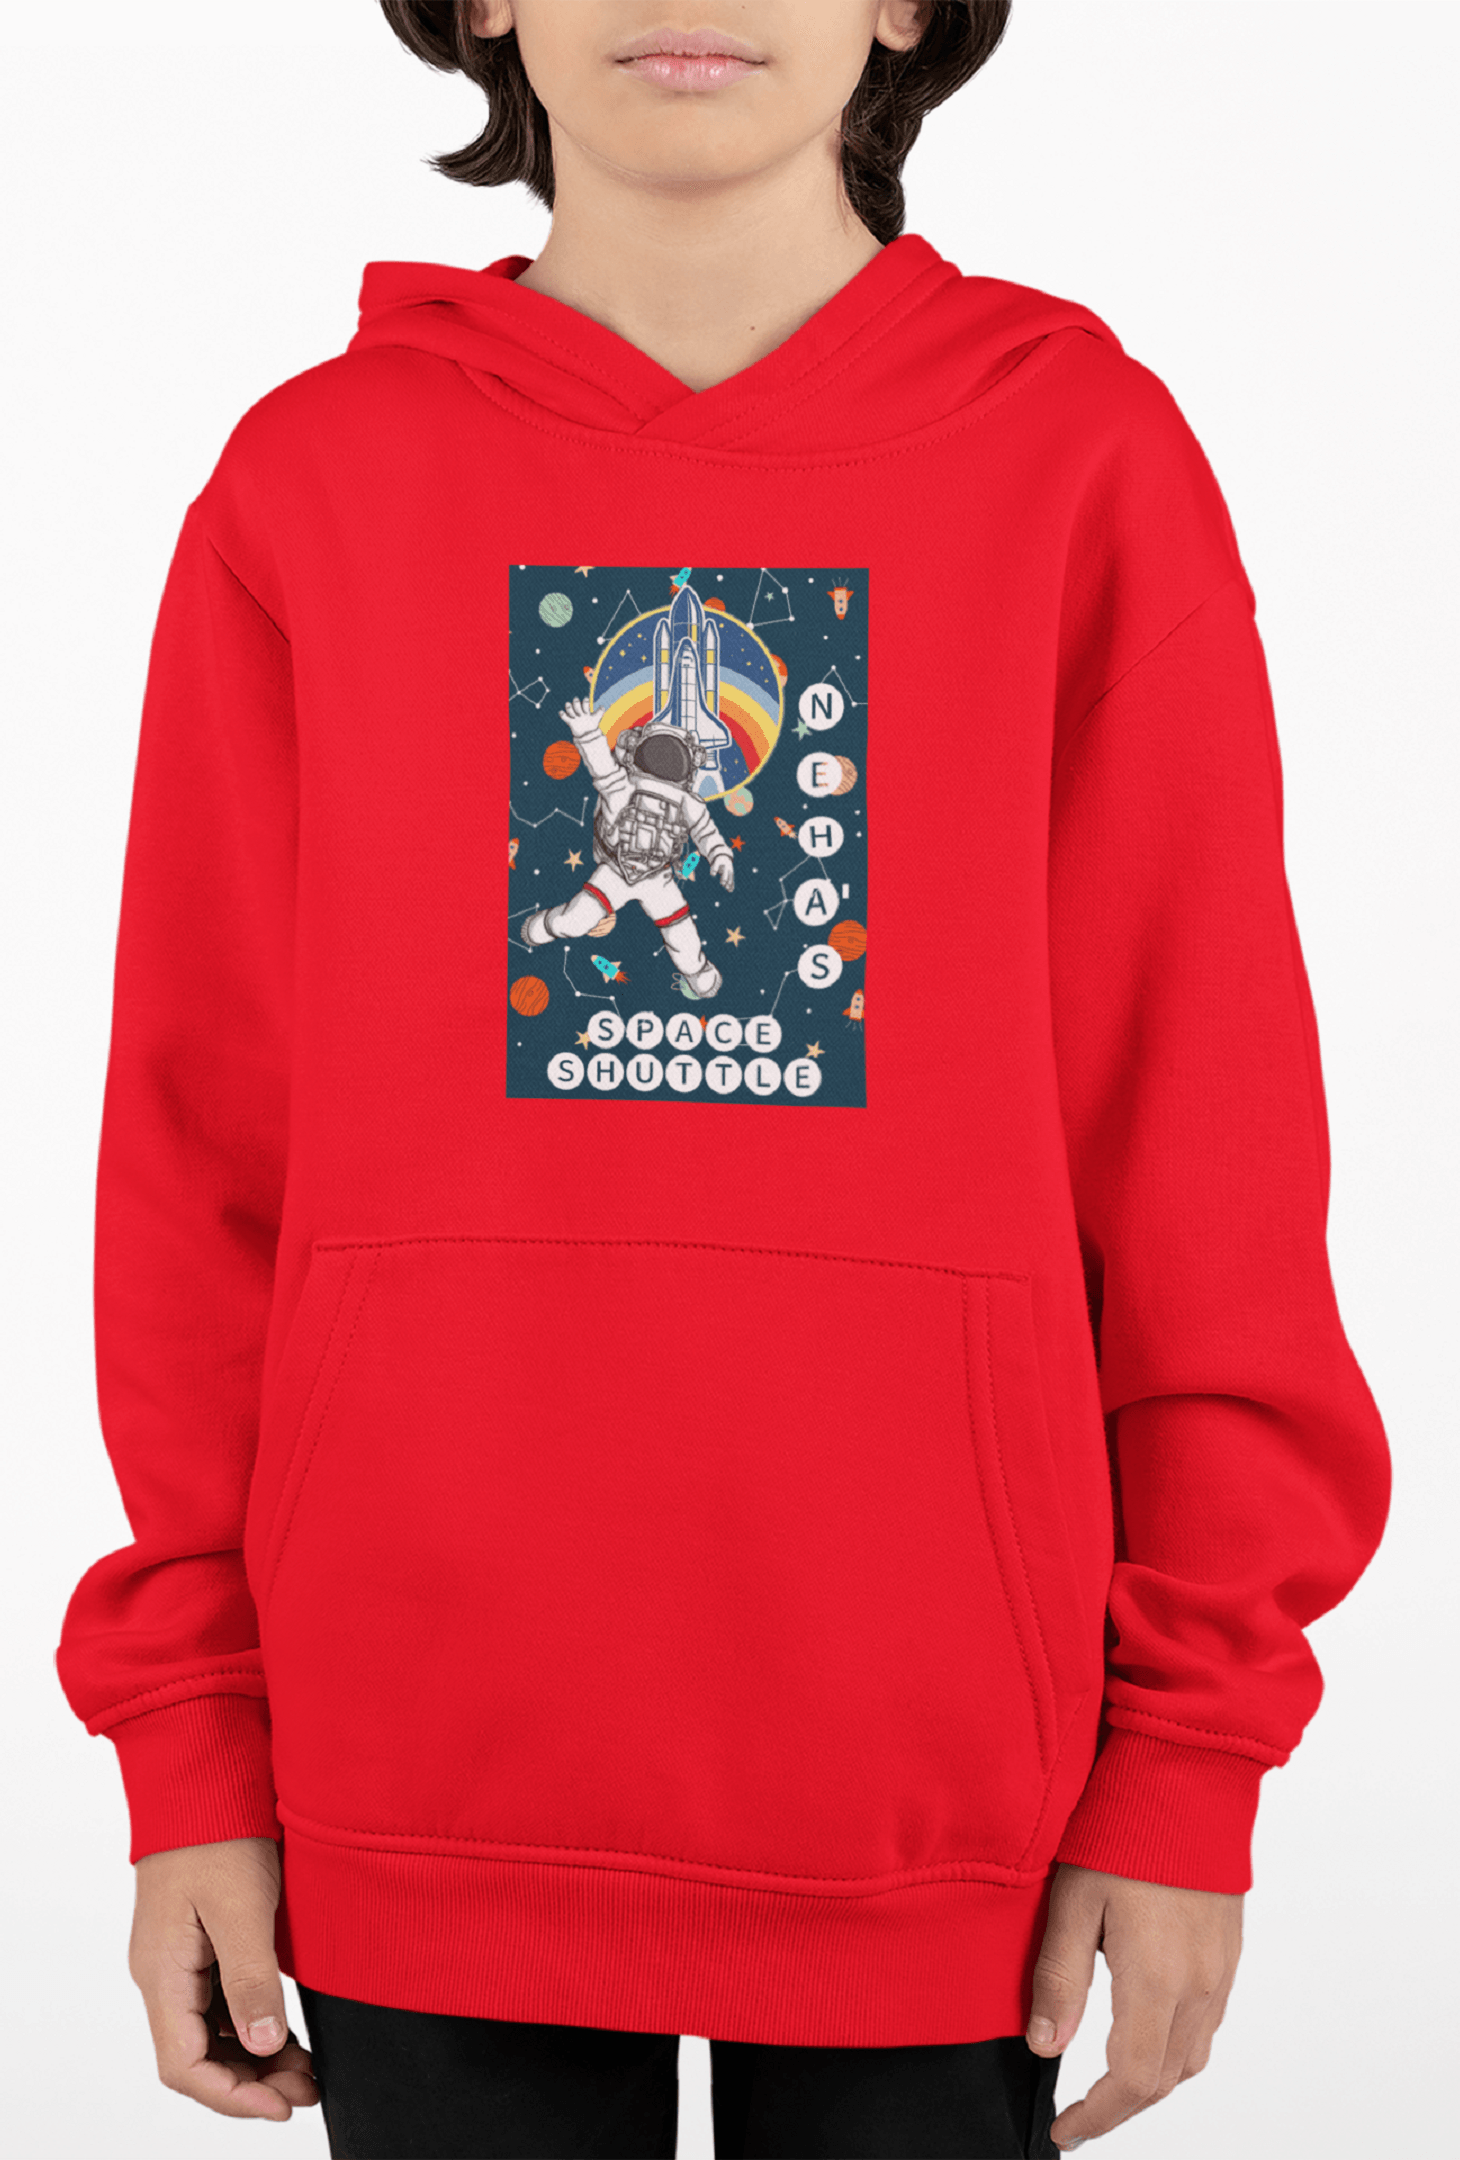 Personalized Red Hoodie for Kids with Astronaut Space Shuttle Design